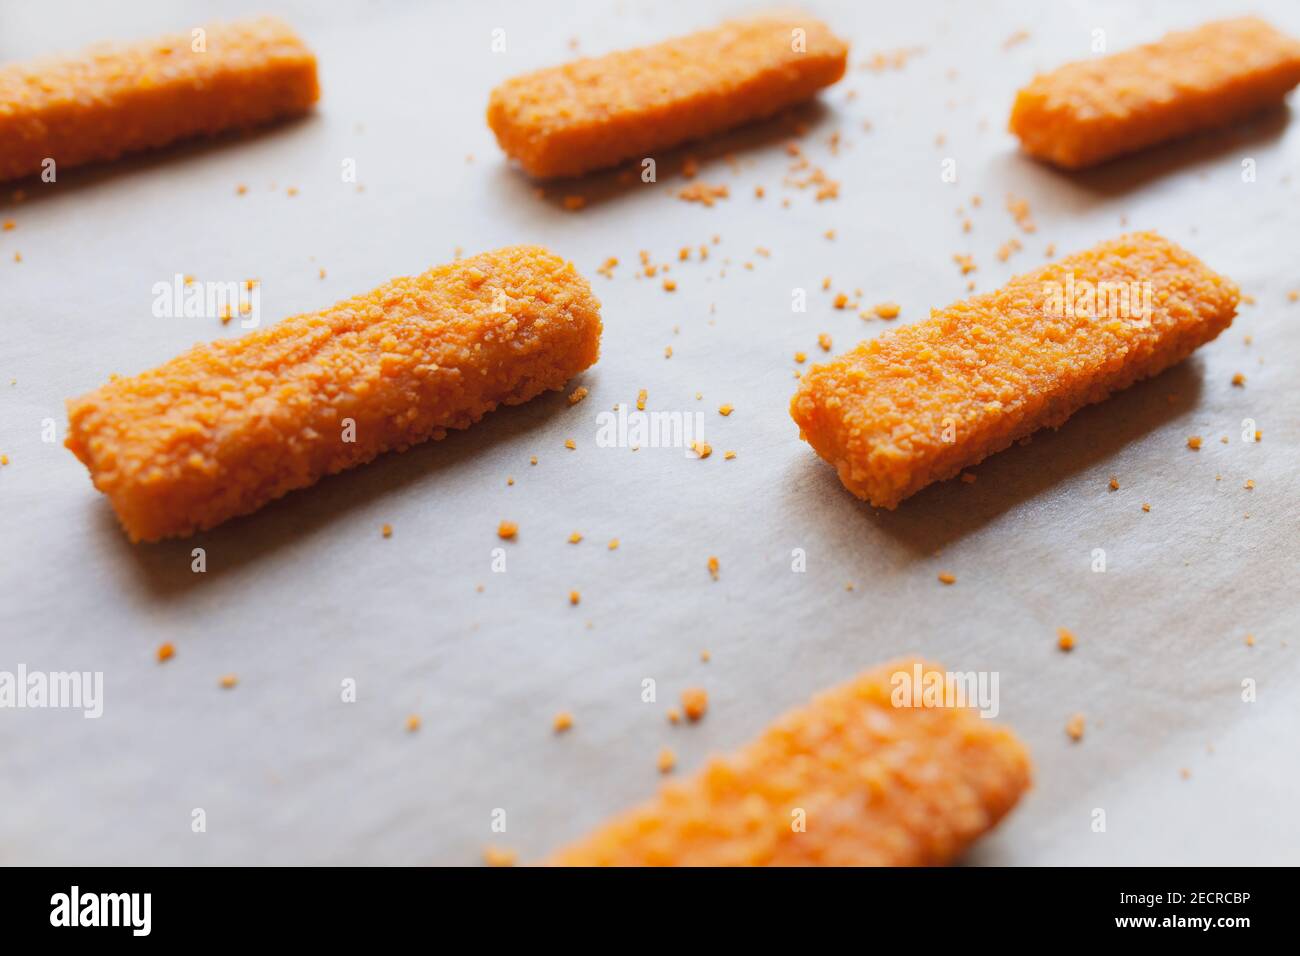 Raw frozen fish fingers on parchment paper, ready for baking, with some crumbs Stock Photo